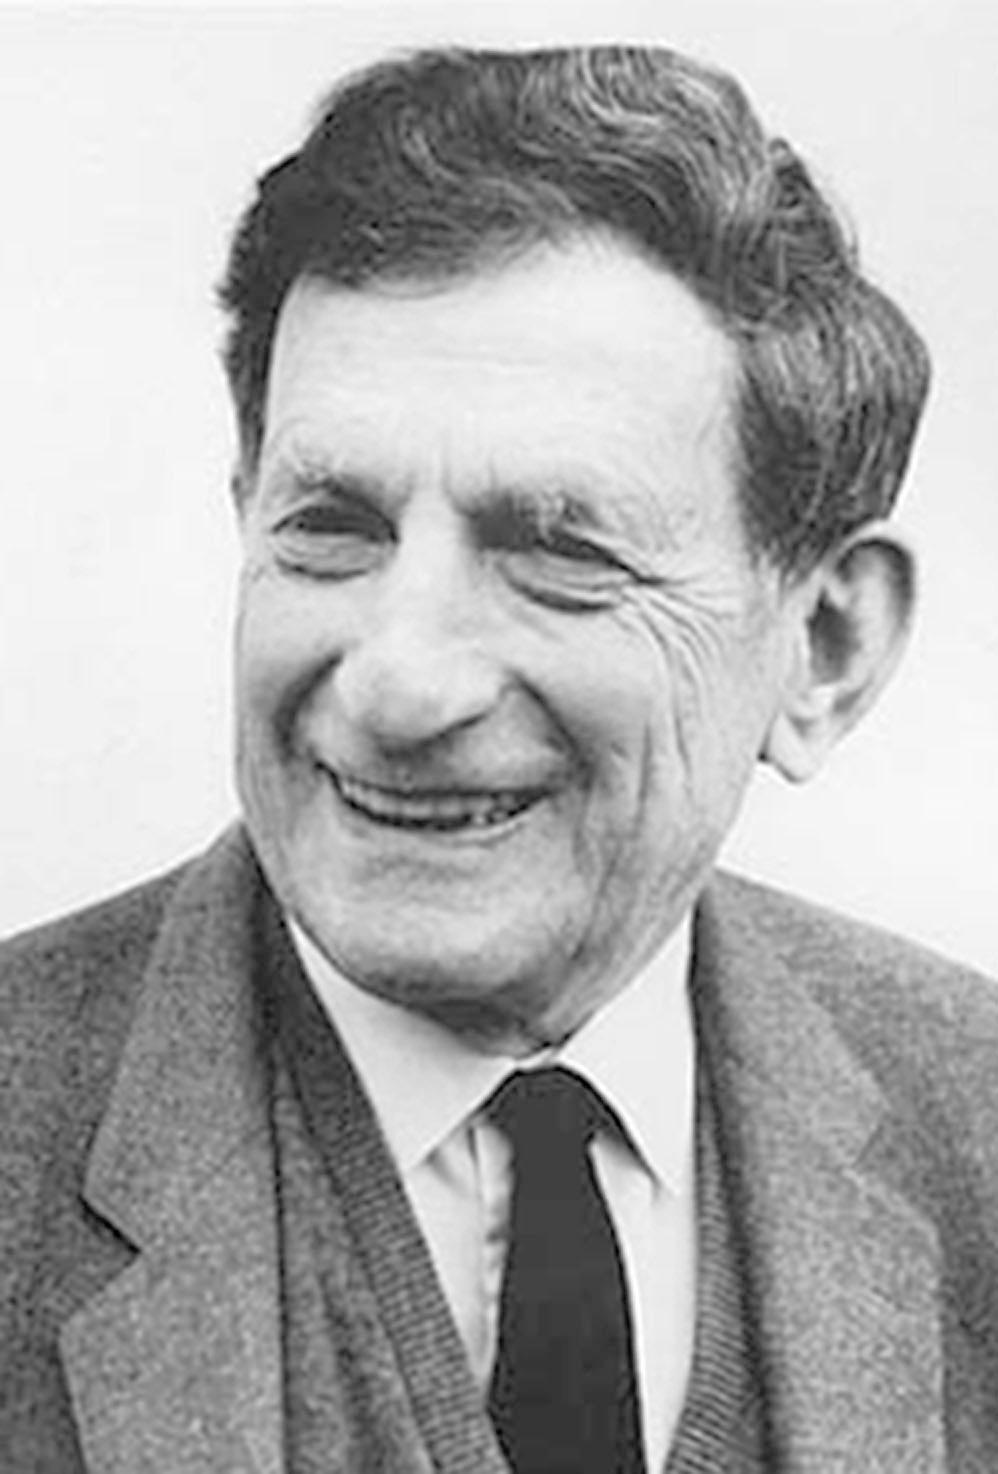 DAVID BOHM: University of London professor of Theoretical Physics David Bohm, and Karl Pribram have proposed scientific theories that demonstrate an amazing similarity to the great mystical traditions of East and West. (David Pratt/Theosophical University Press)